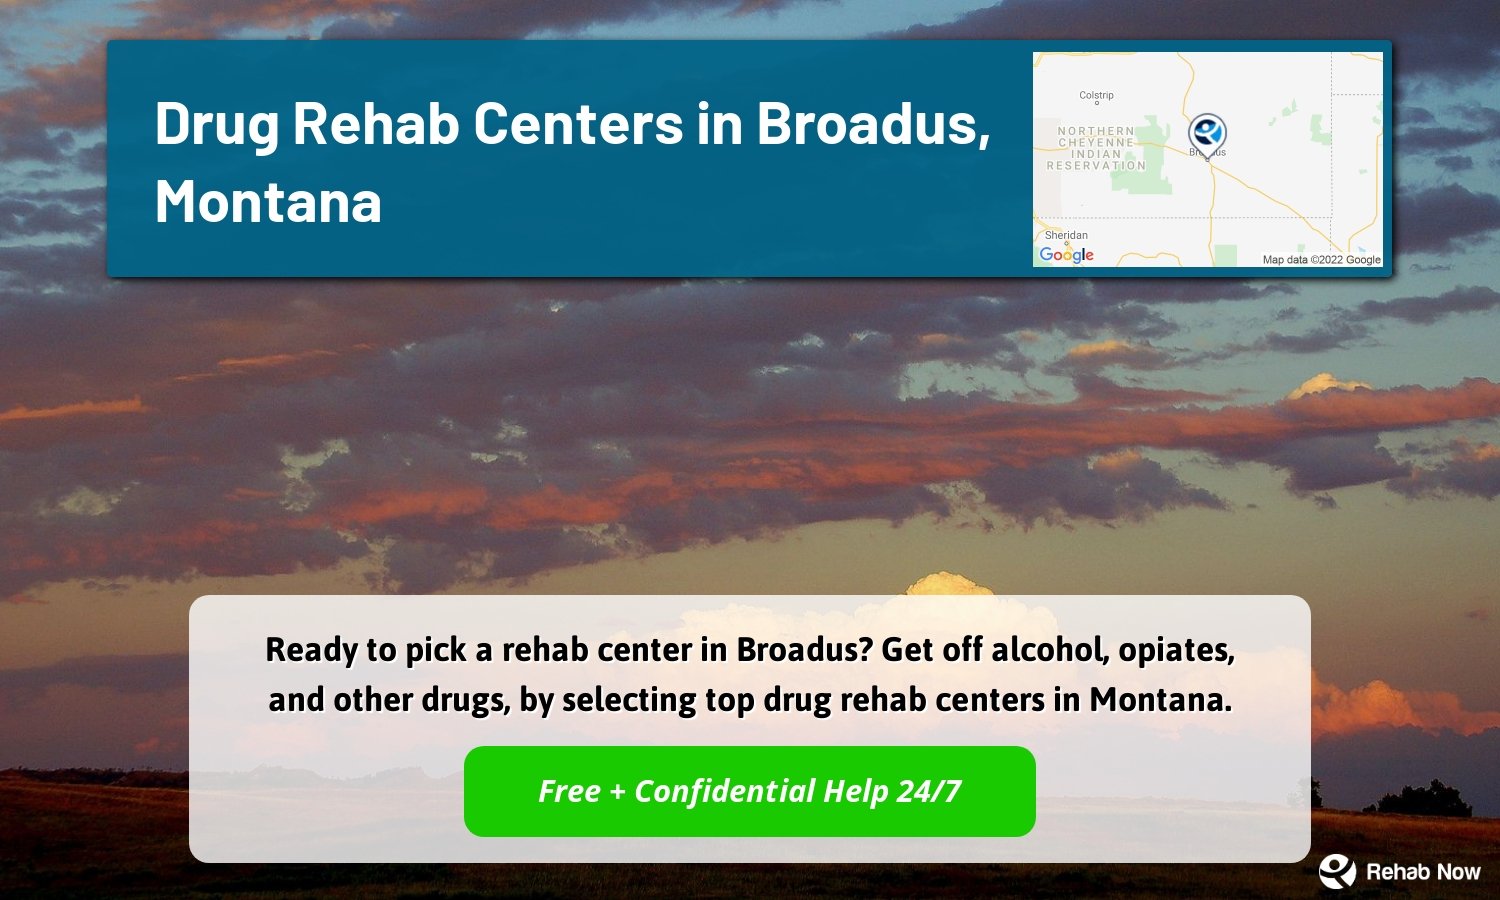 Ready to pick a rehab center in Broadus? Get off alcohol, opiates, and other drugs, by selecting top drug rehab centers in Montana.